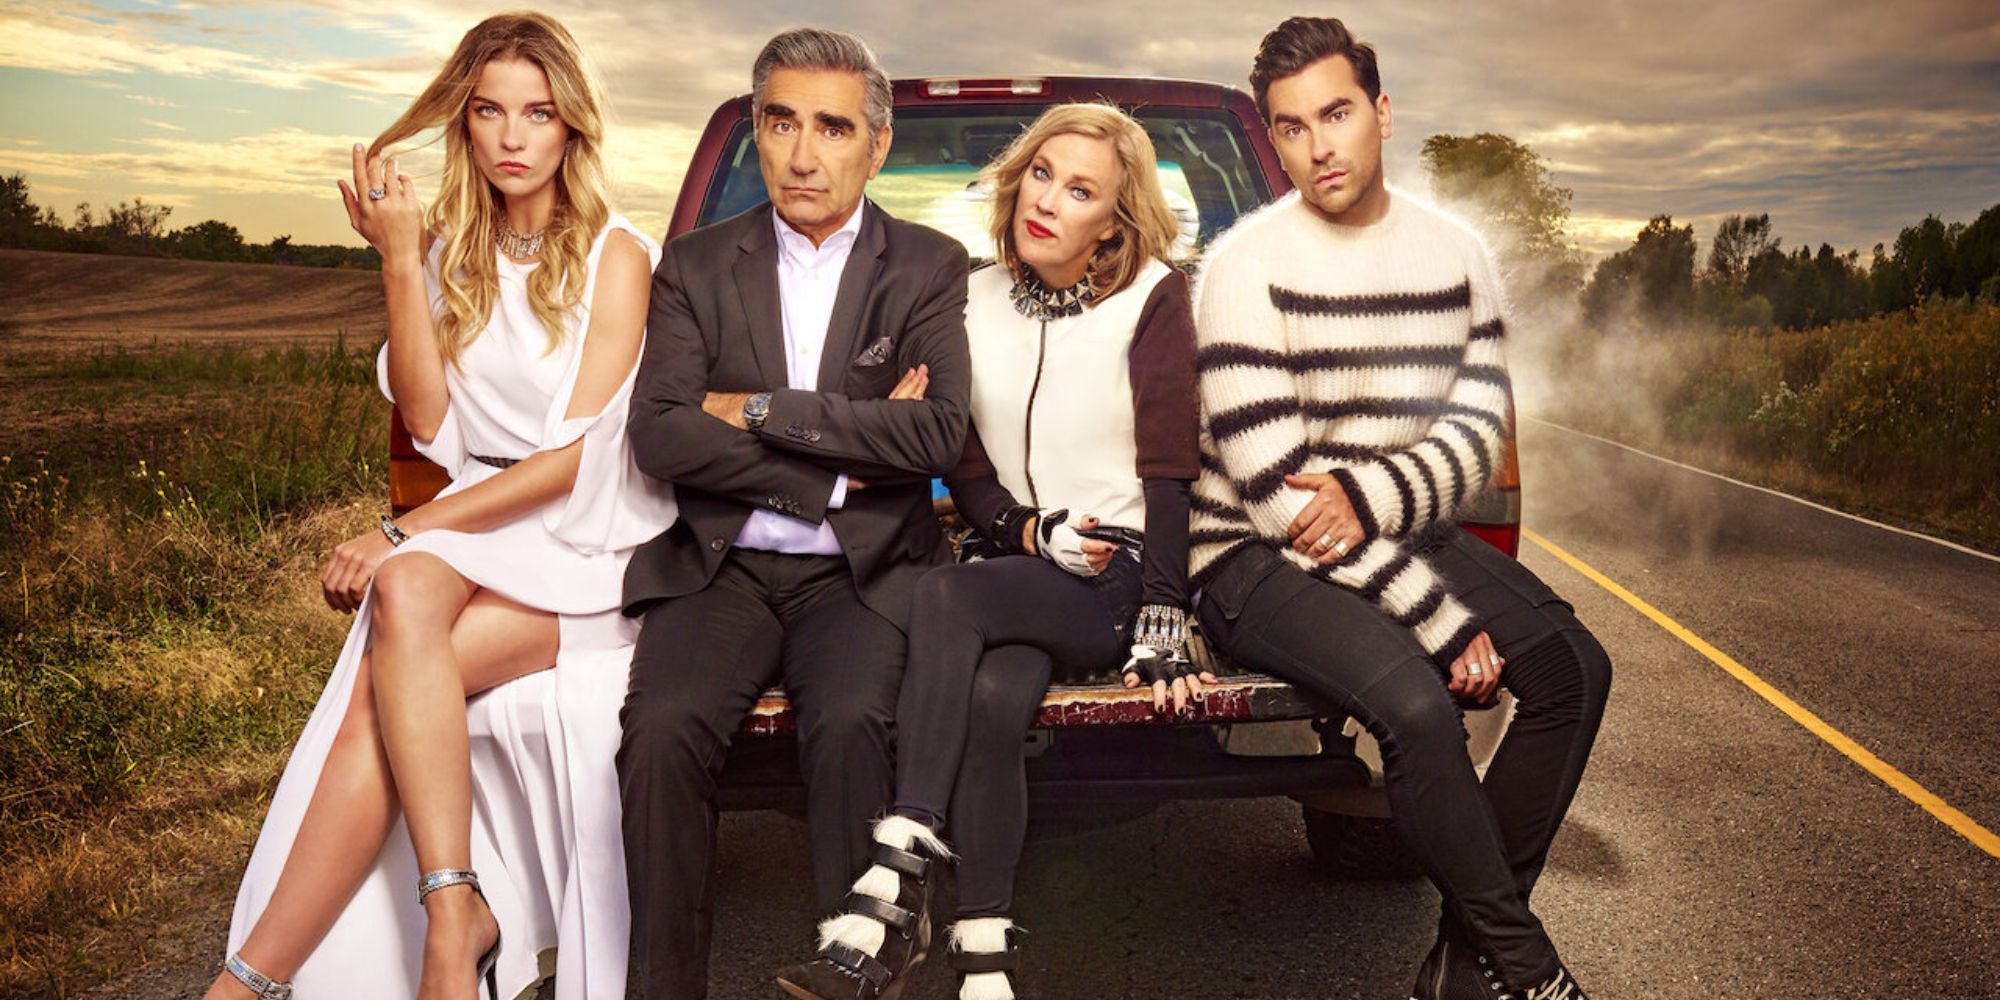 10 Things You Might Not Know About 'Schitt's Creek'